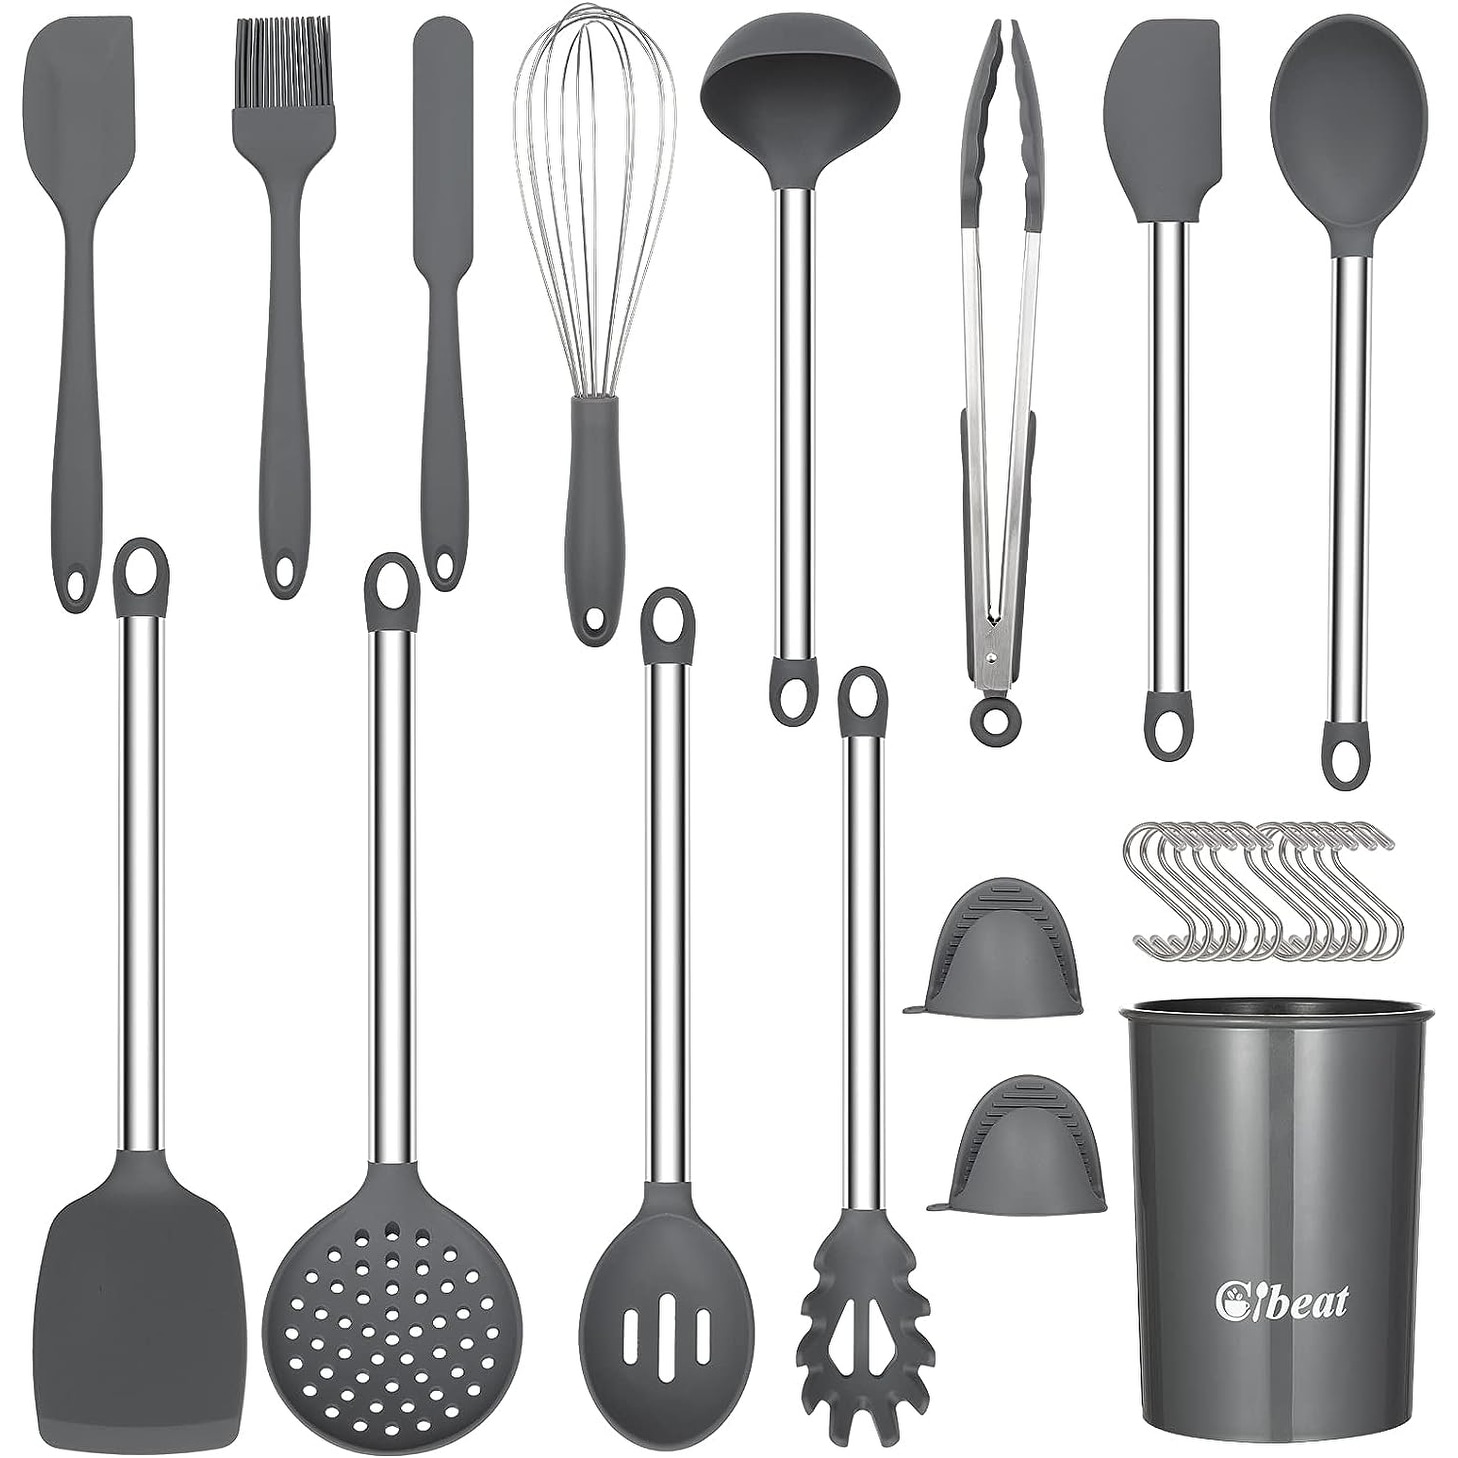 https://ak1.ostkcdn.com/images/products/is/images/direct/55b751bcabf67ef6e287ffc5a7707816bf46ffde/Kitchen-Utensils-Set-with-Holder%2C-Silicone-Cooking-Utensils-Gadget.jpg